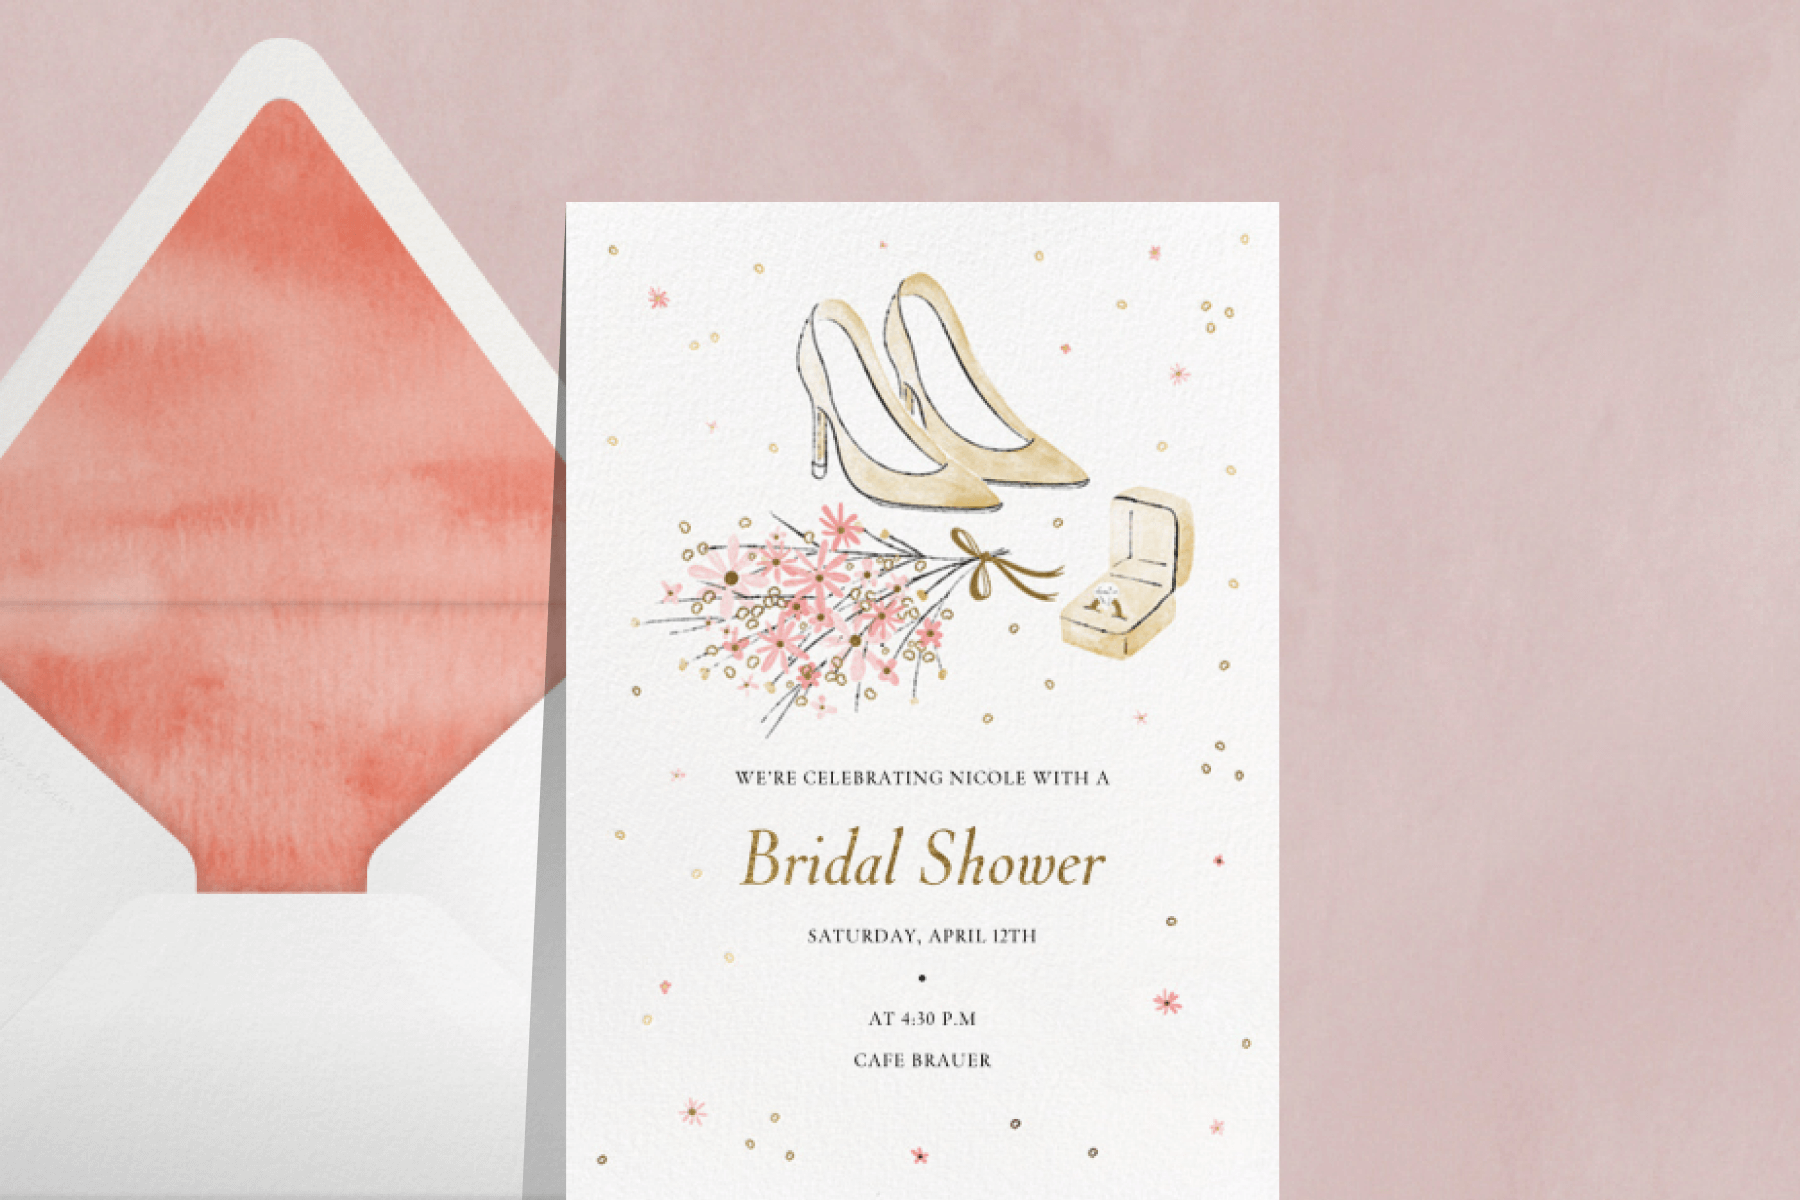 A bridal shower invitation featuring high heels, a ring in a box, and a bouquet.